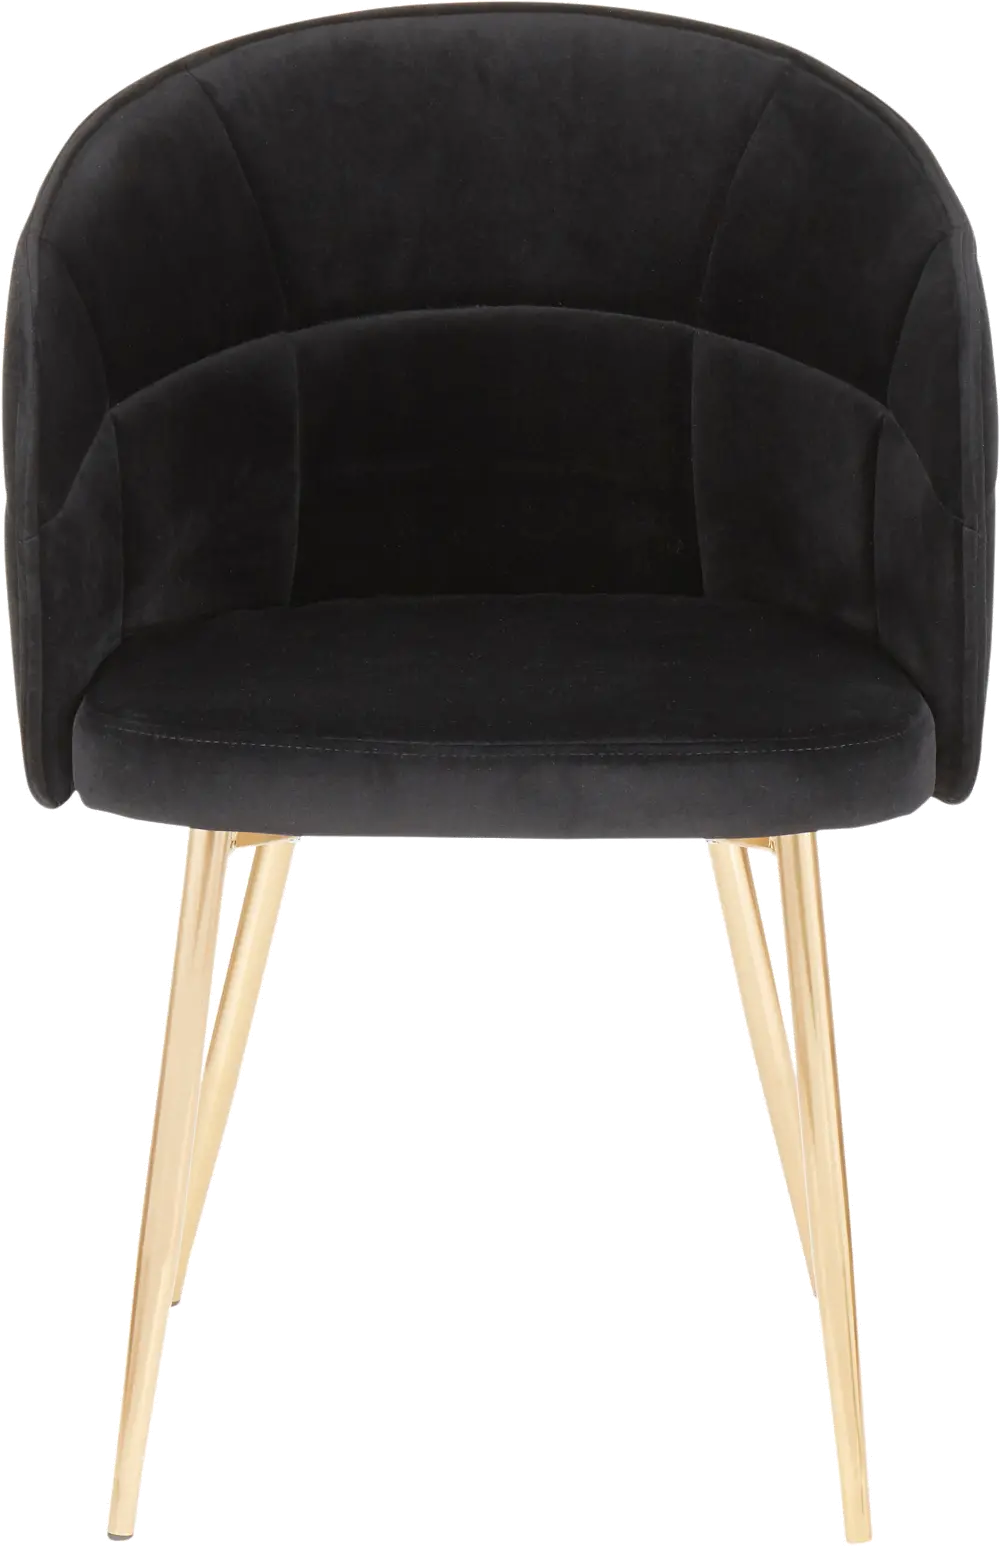 CH-LINDSY-AUVBK Contemporary Black and Gold Dining Room Chair - Lindsey-1